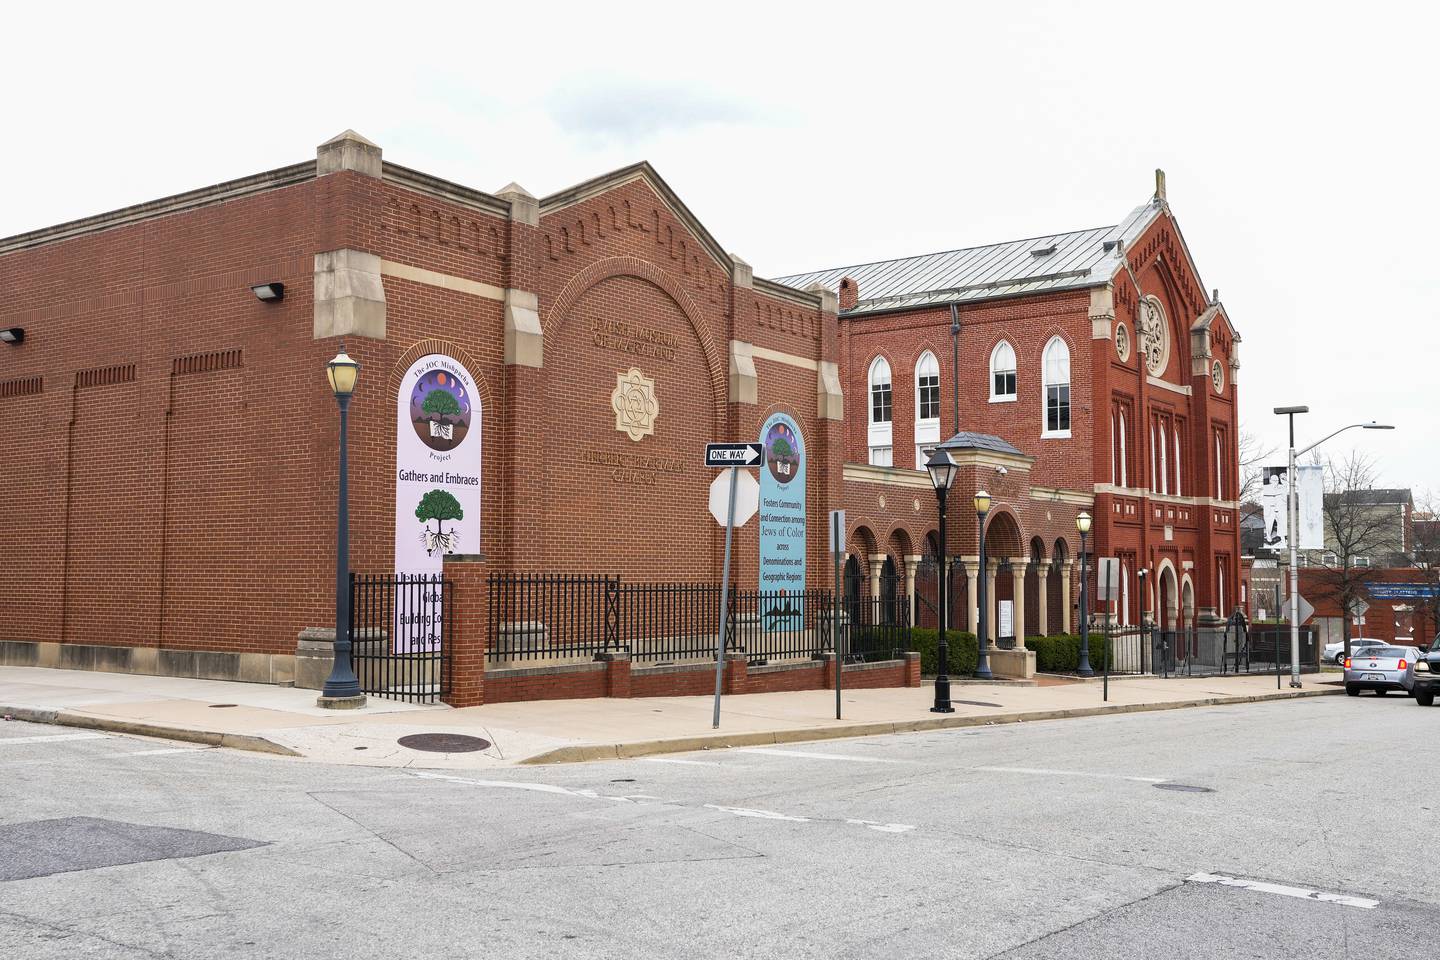 The Jewish Museum of Maryland, at Loyd St. and Watson St. on March 2, 2023.